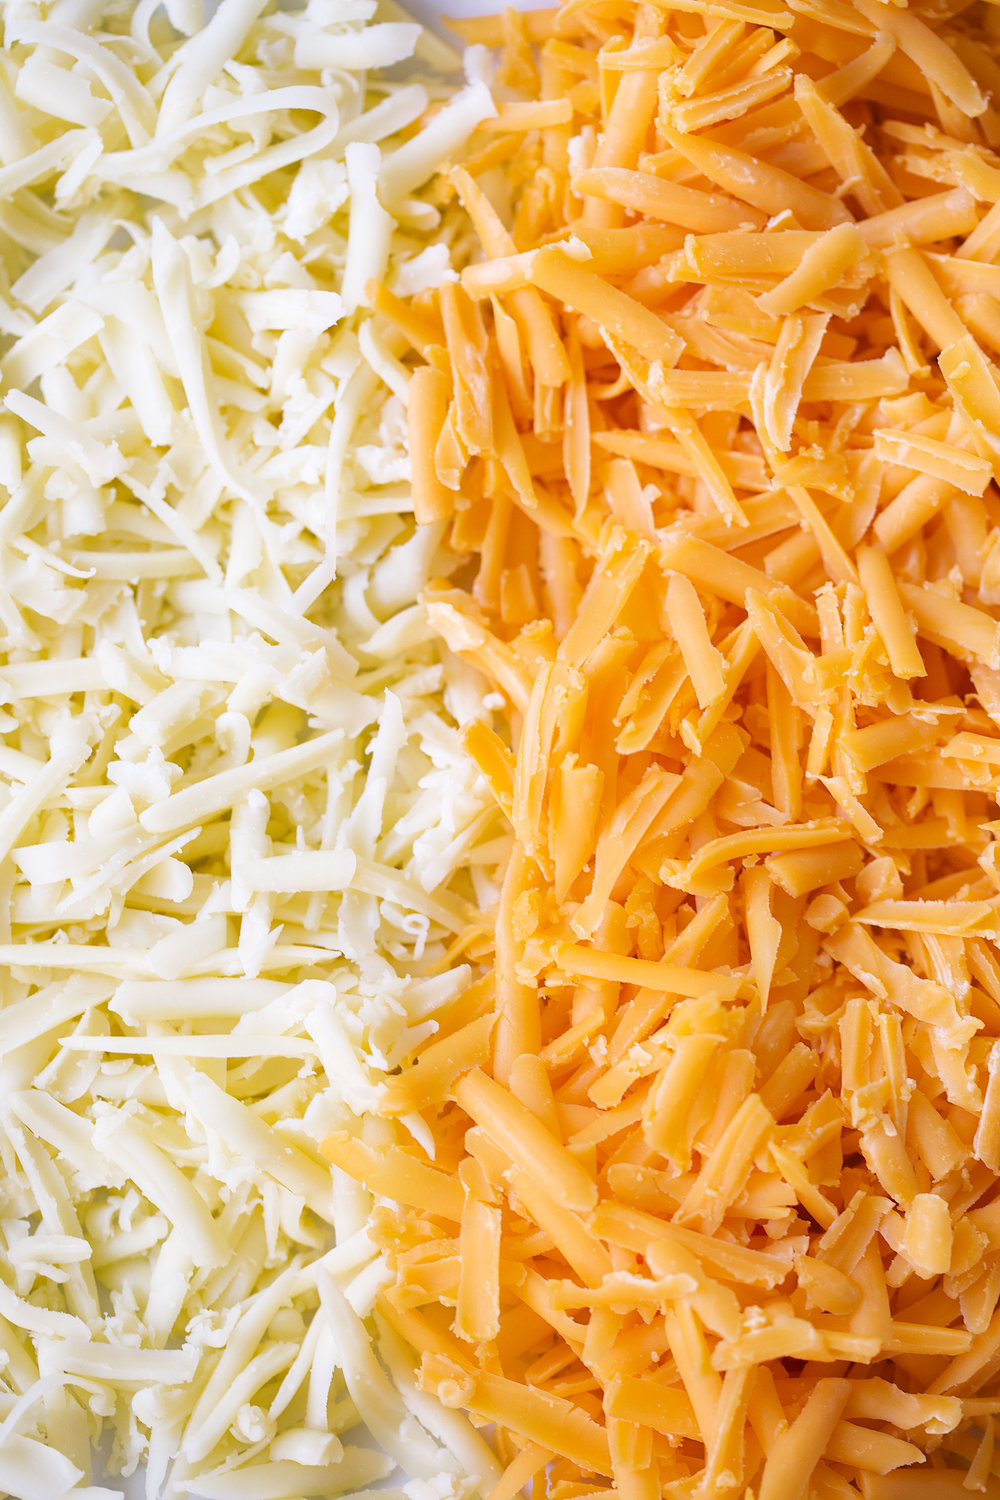 monterey jack and cheddar cheese closeup